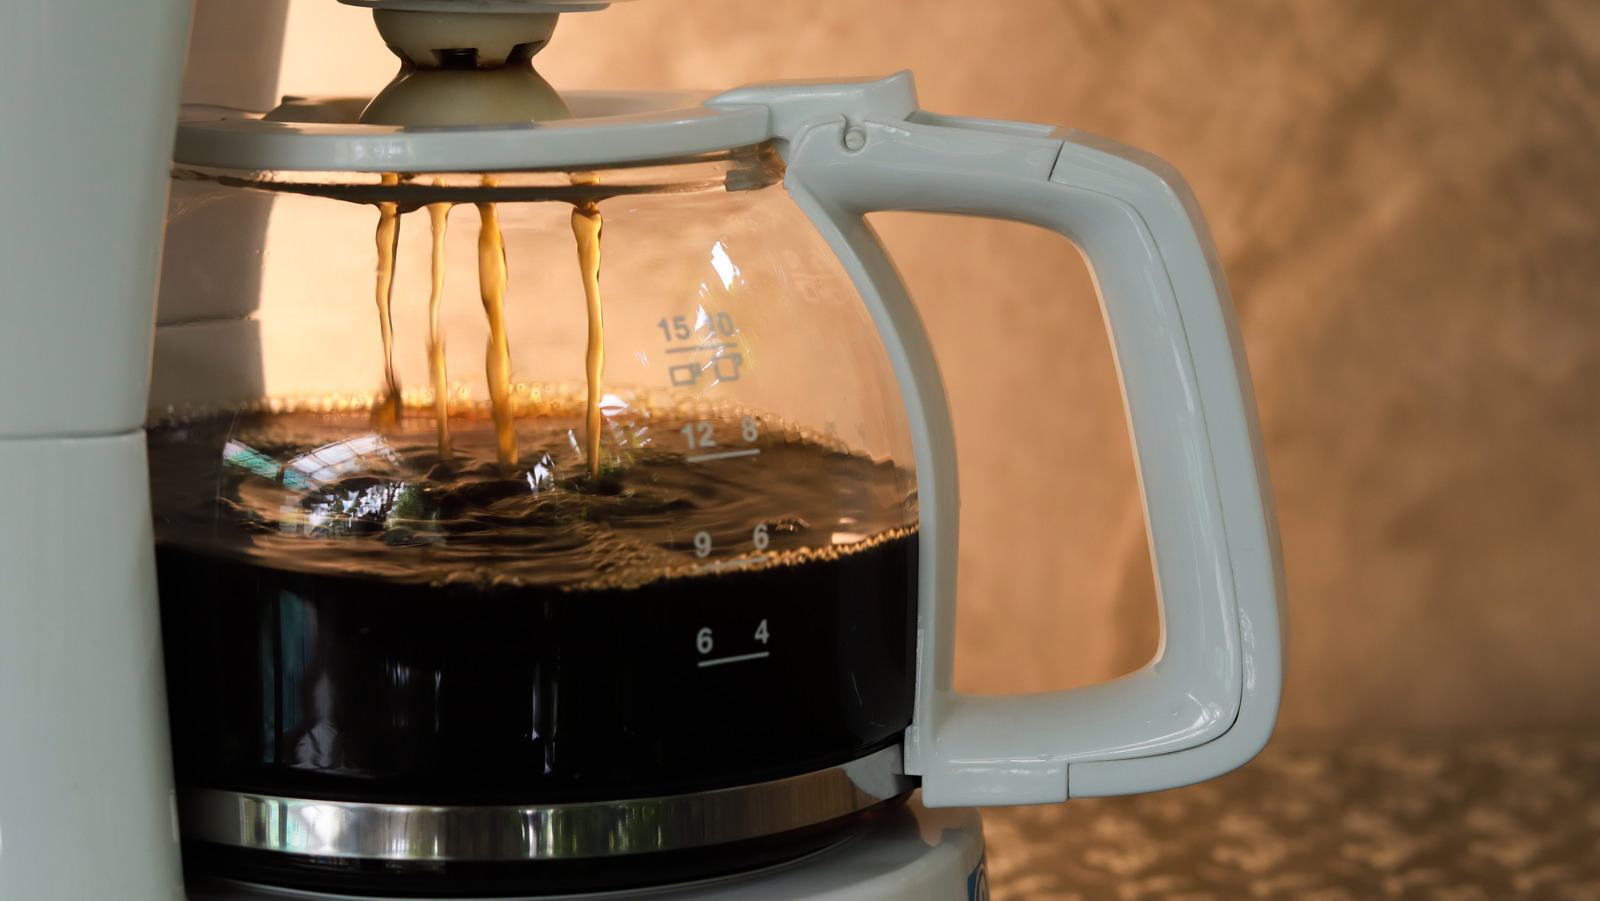 https://www.tastingtable.com/img/gallery/why-you-should-never-use-milk-in-your-coffee-maker/l-intro-1688658696.jpg